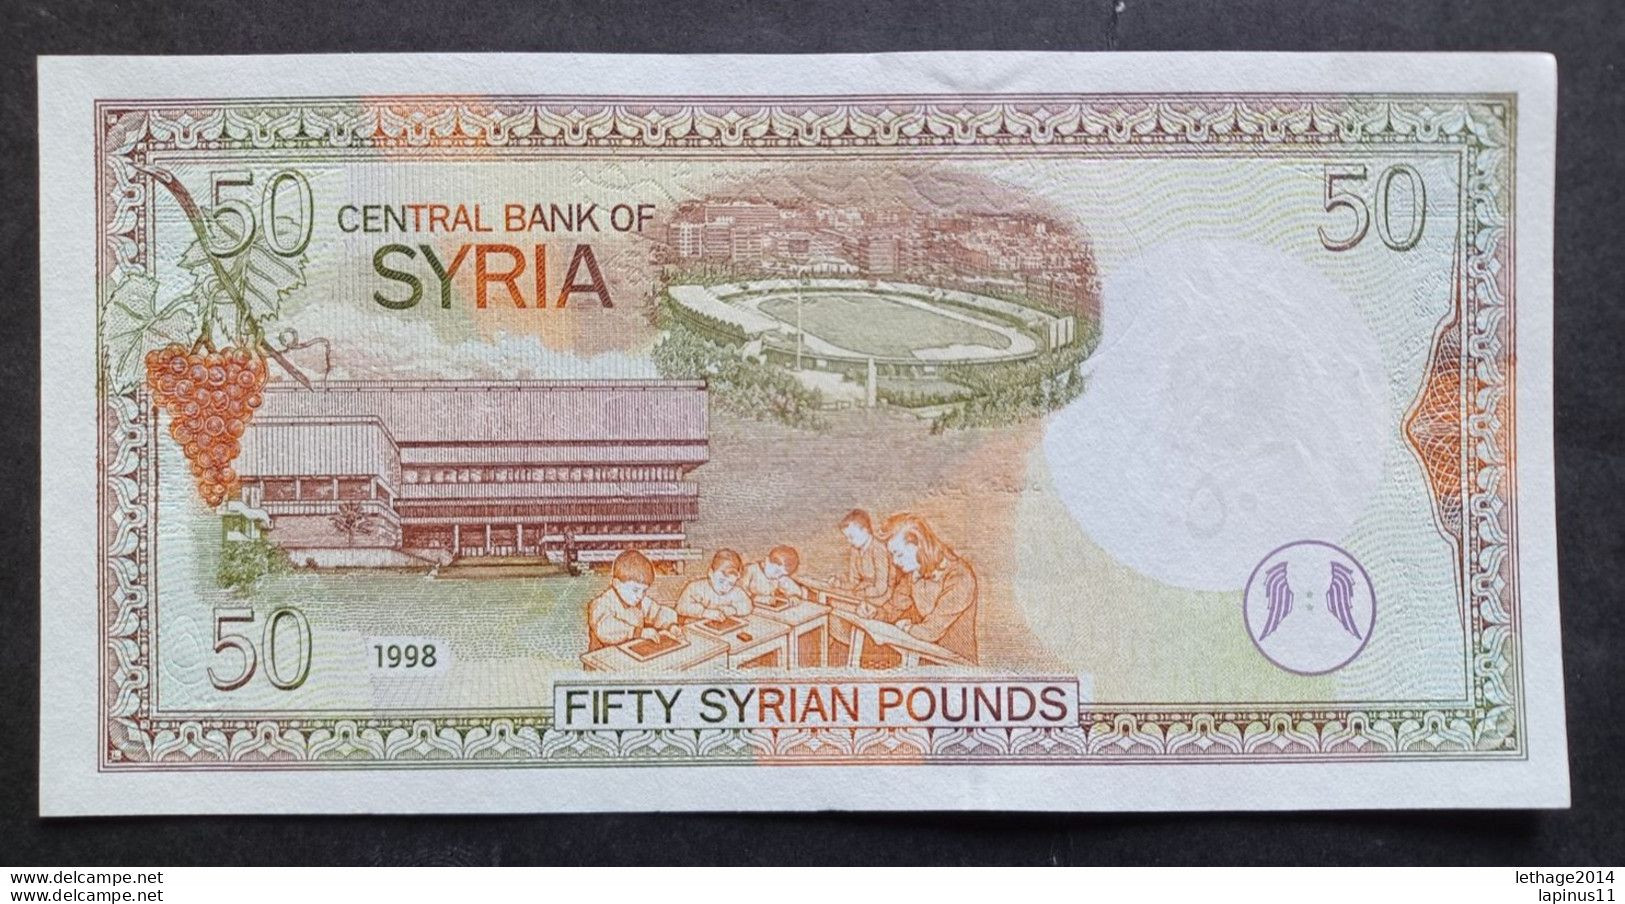 BANKNOTE SYRIA SIRIE 50 POUNDS CITADEL OF ALEPPO 1998 UNCIRCOLATED - Syrien